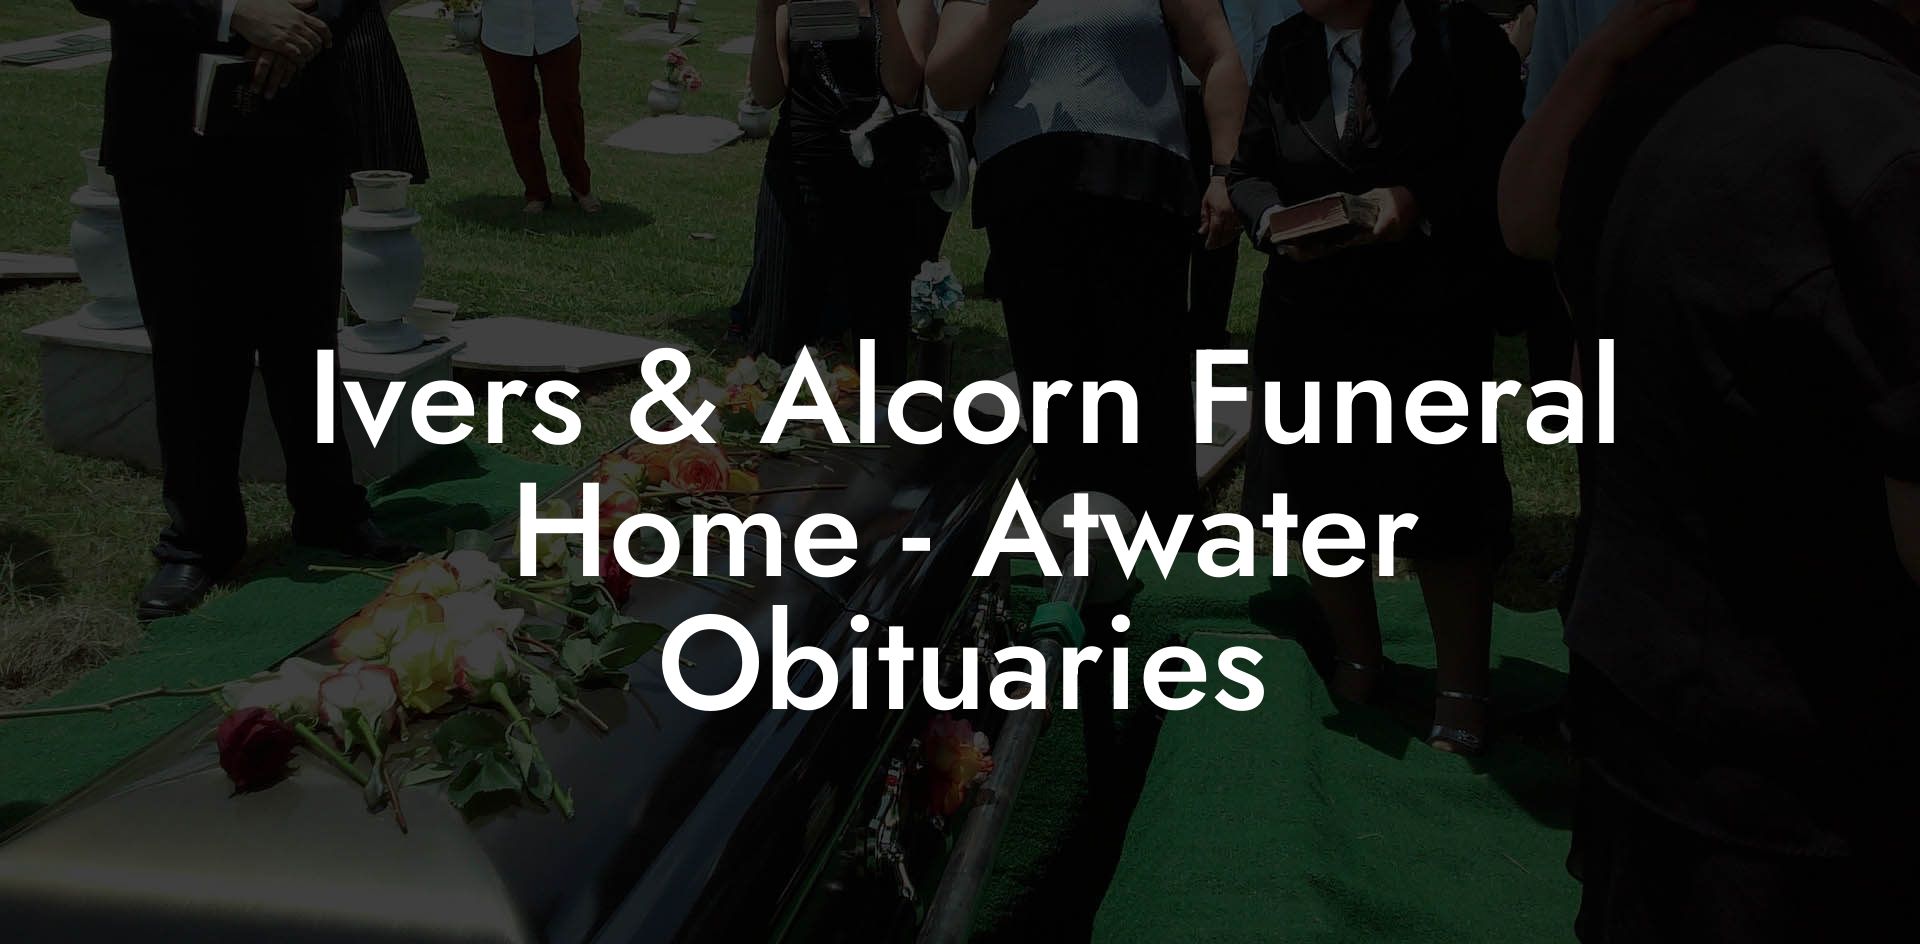 Ivers & Alcorn Funeral Home - Atwater Obituaries